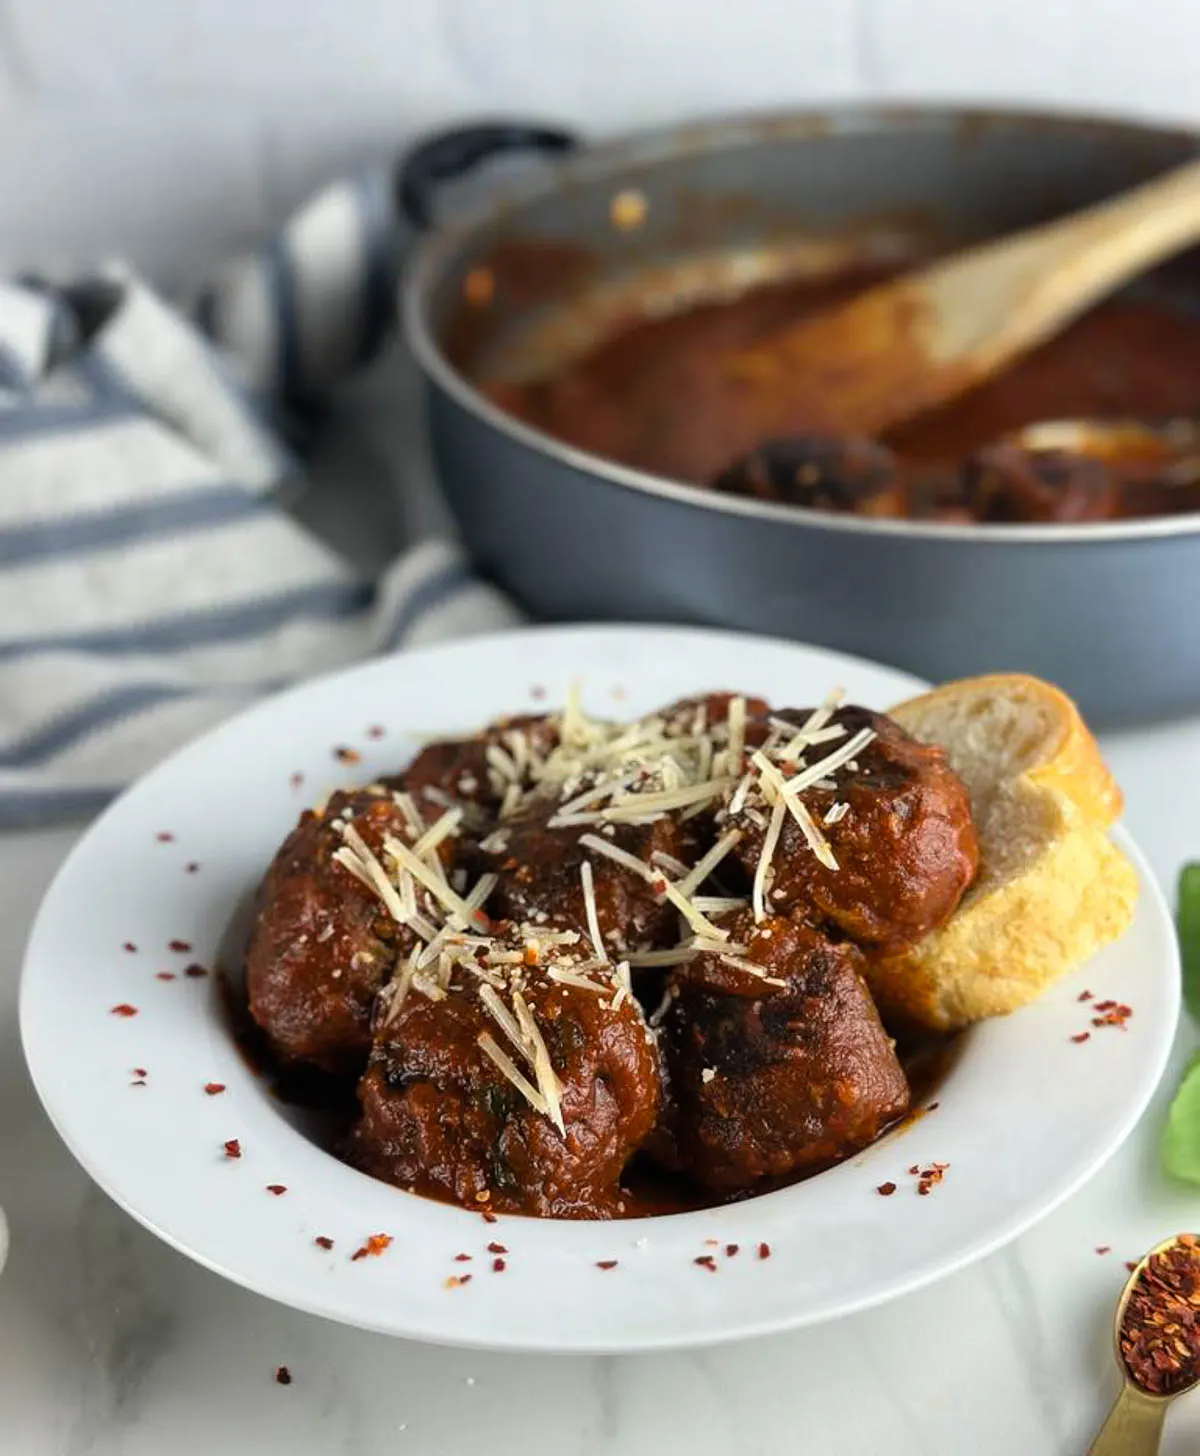 A bowl of Italian spicy meatballs in tomato sauce with parmesan cheese and bread